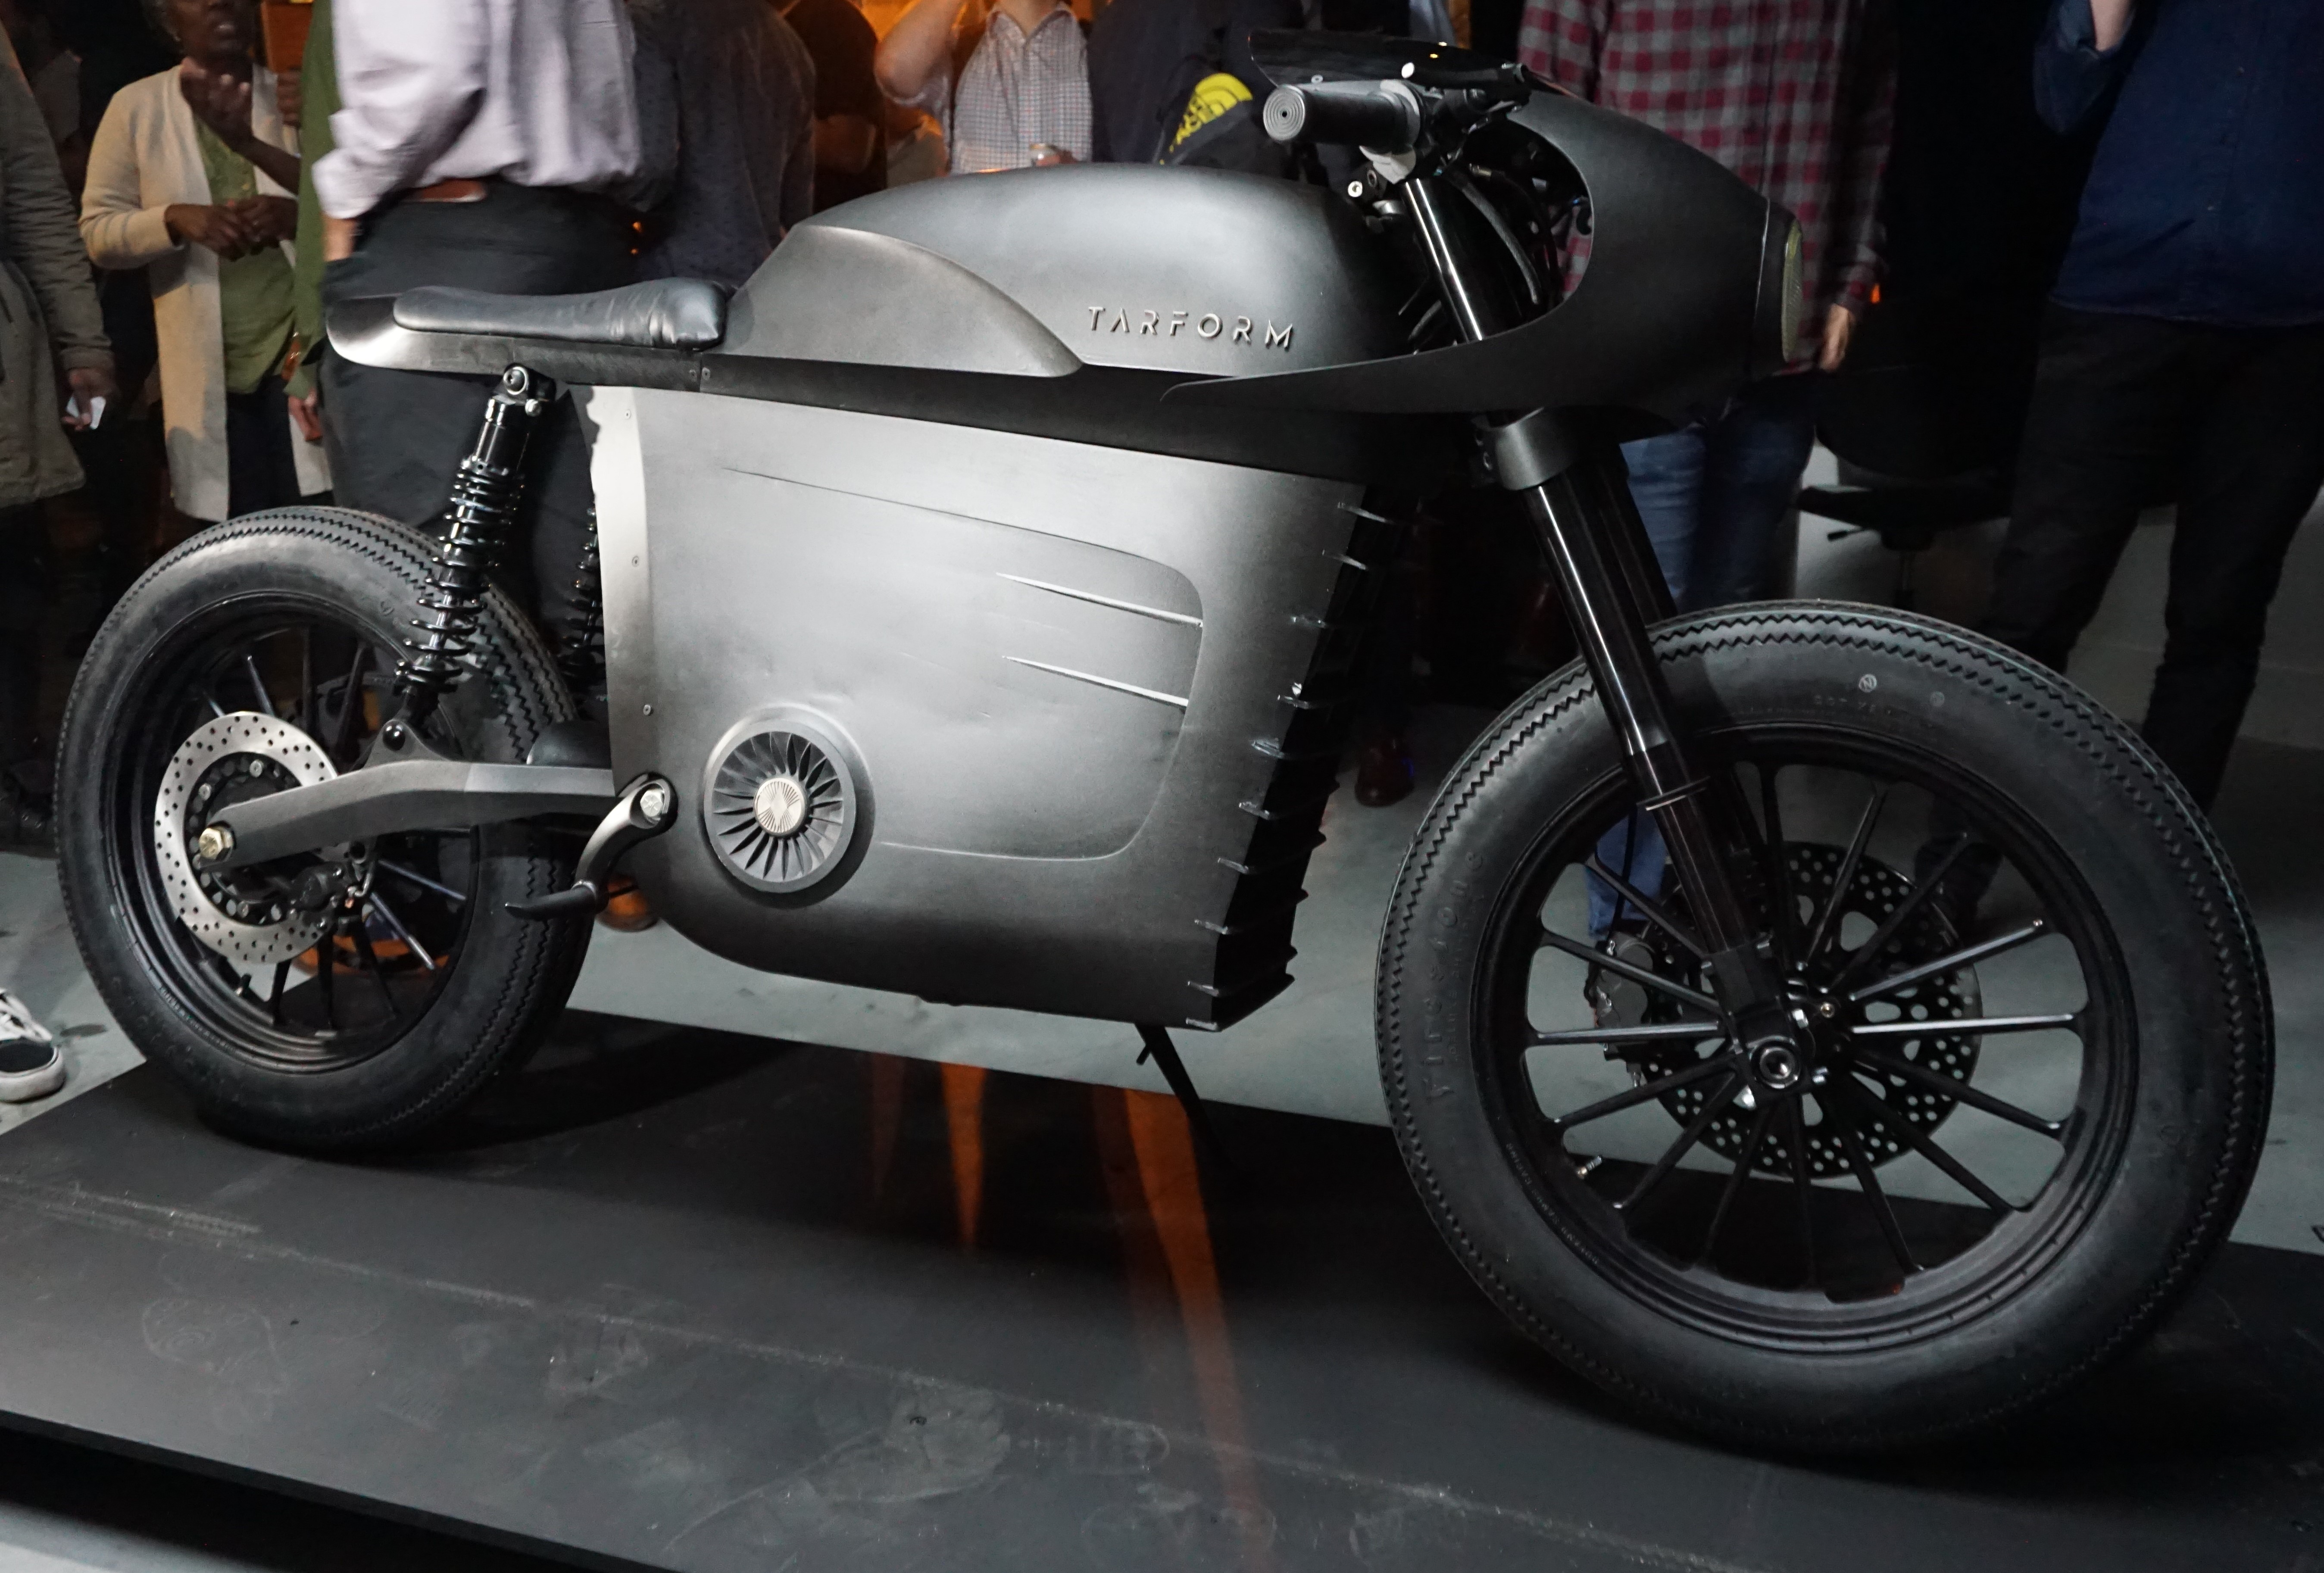 Tarform Debuted New E Motorcycles But Is There A U S Market Pnu